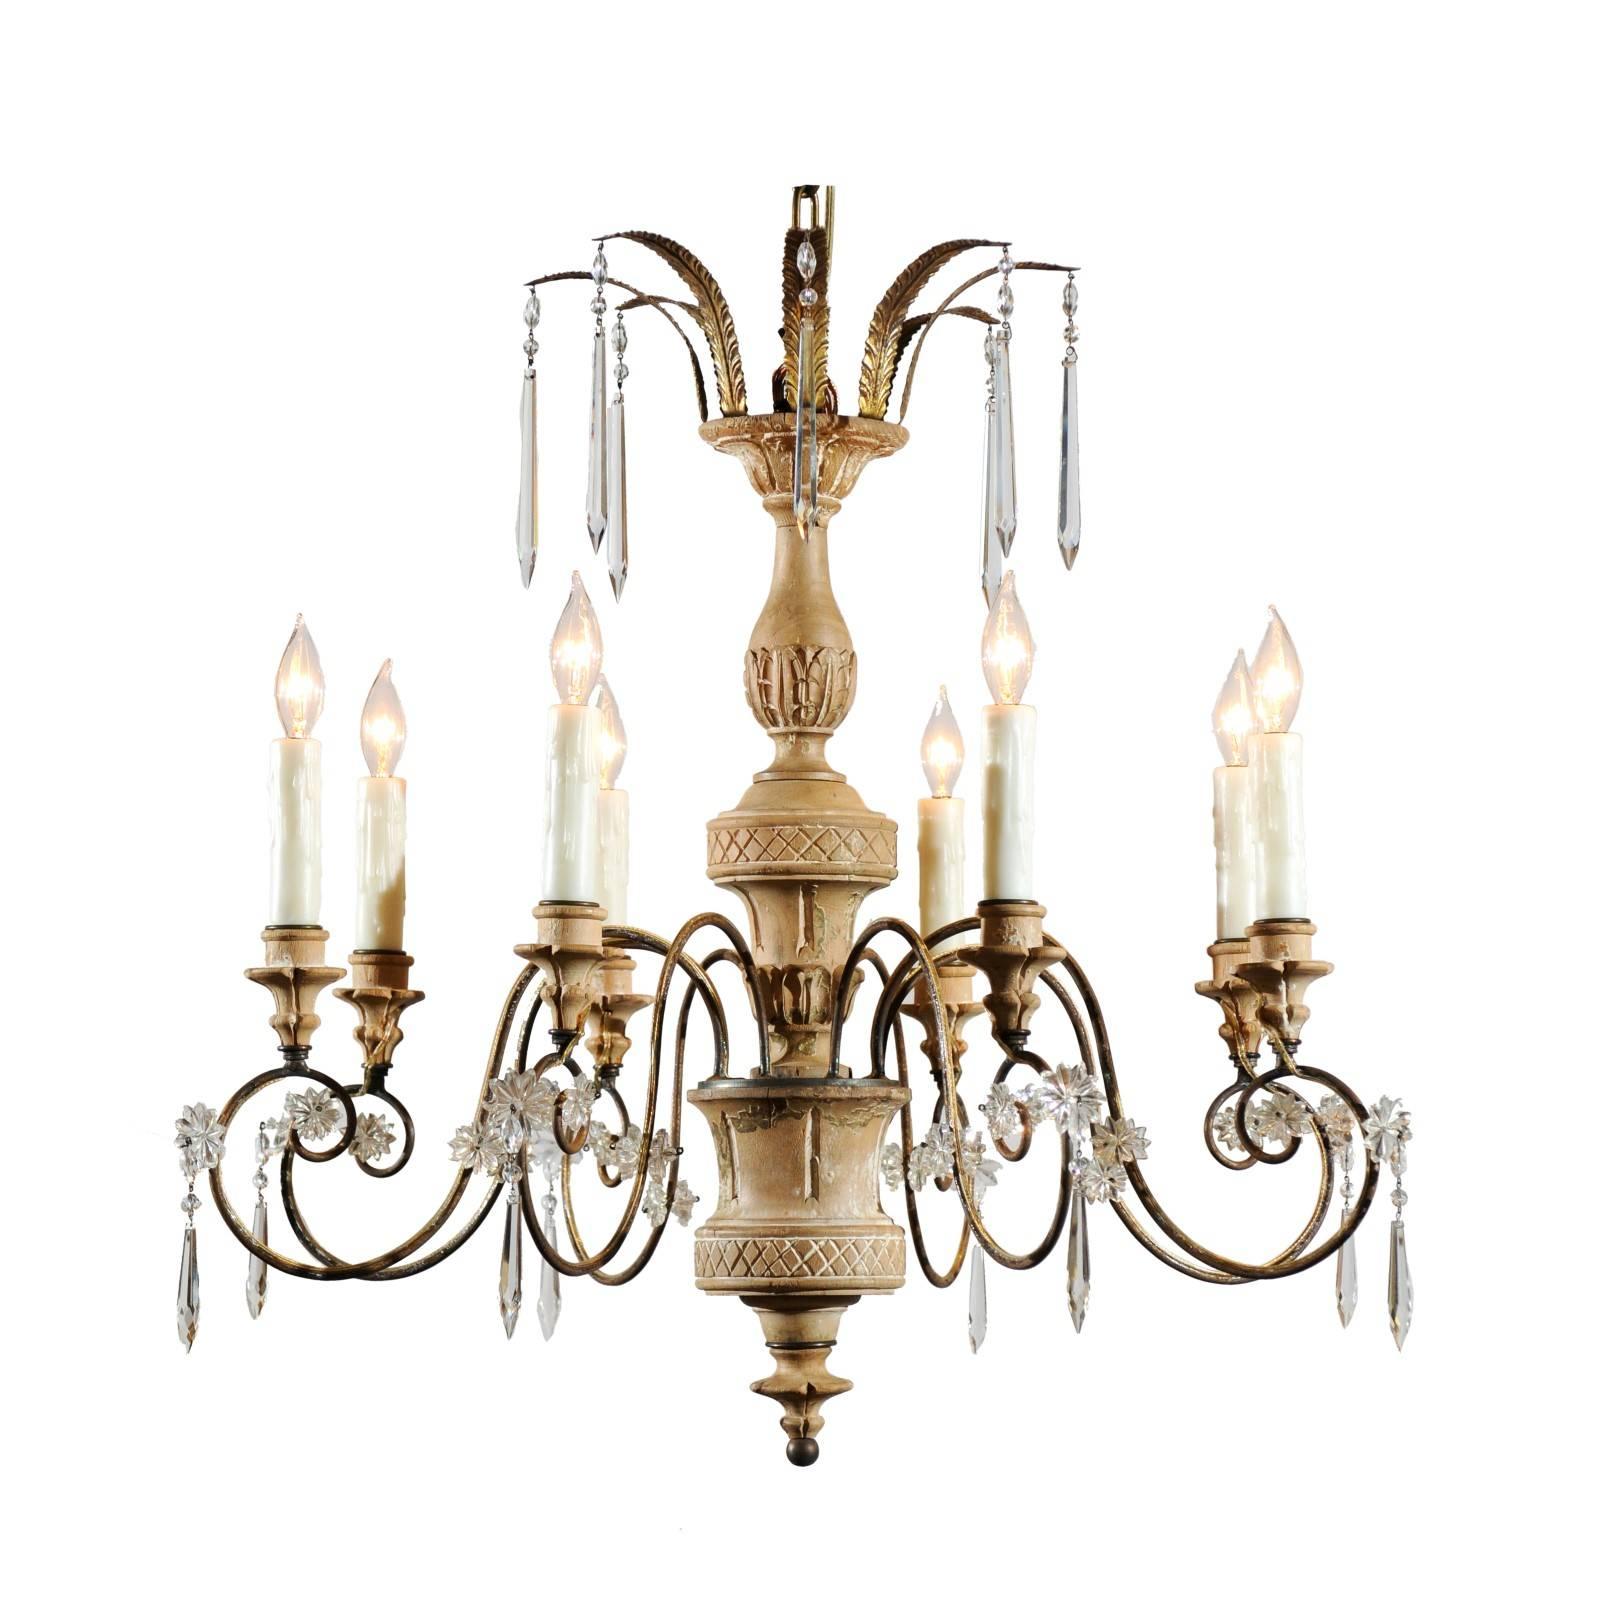 Italian Eight-Light Carved Wood and Gilt Metal Chandelier with Central Column